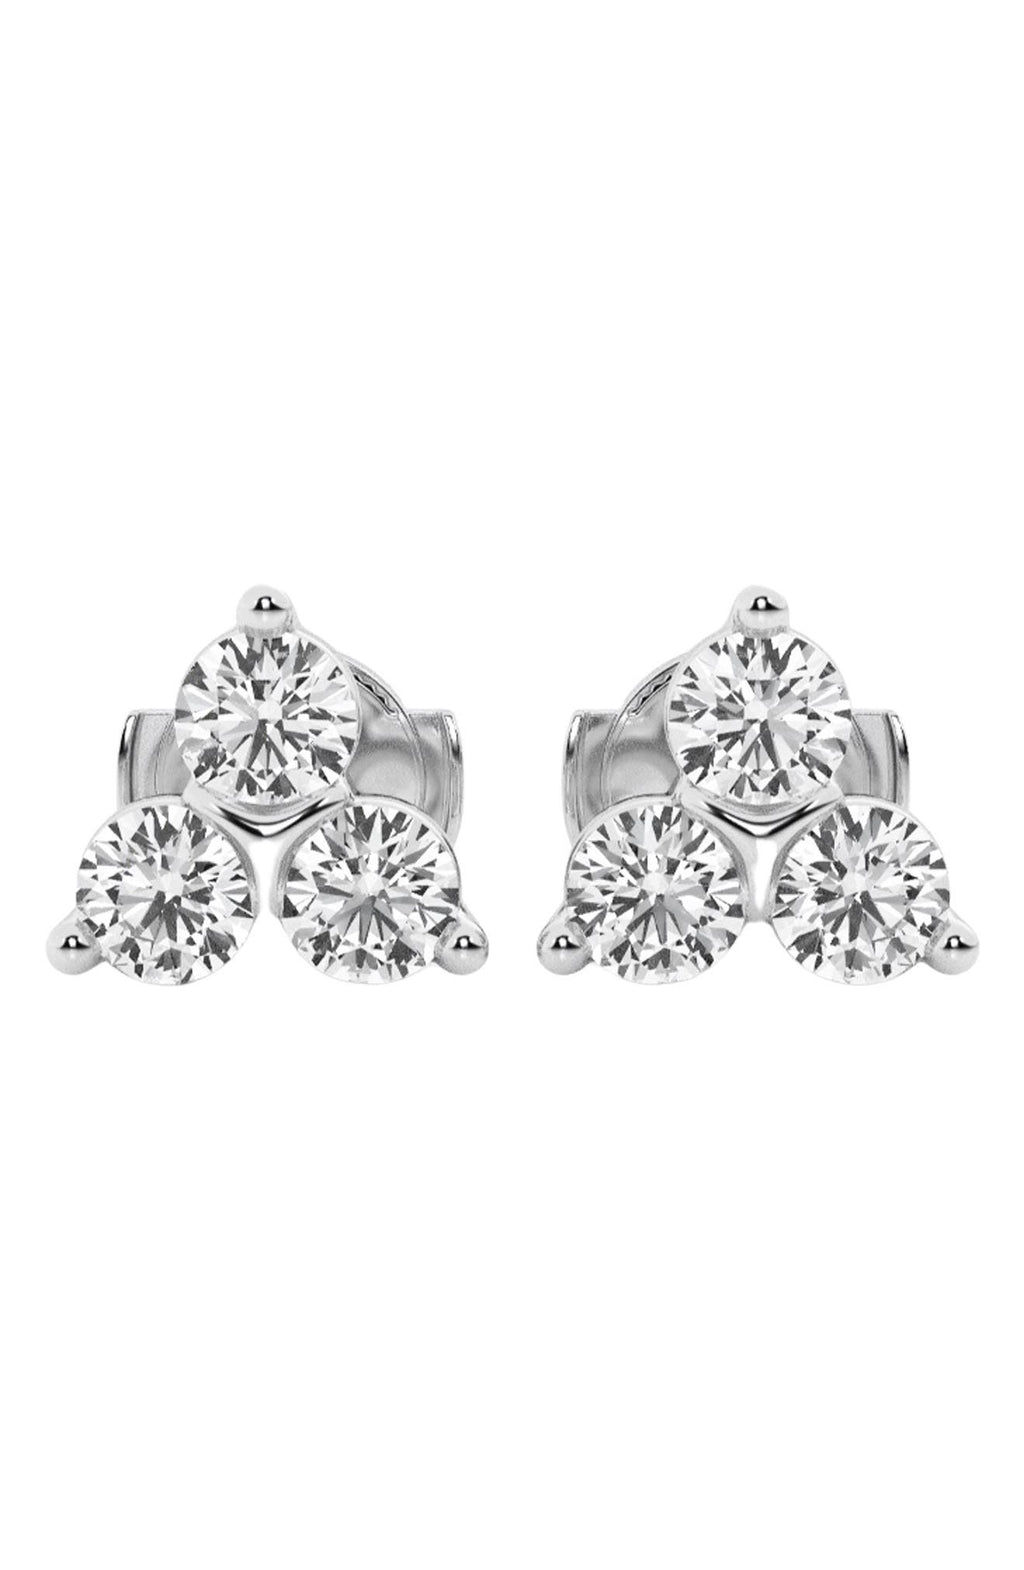 Badgley Mischka Collection 14K White Gold Lab Grown Diamond Stud Earrings, Main, color, WHITE GOLD